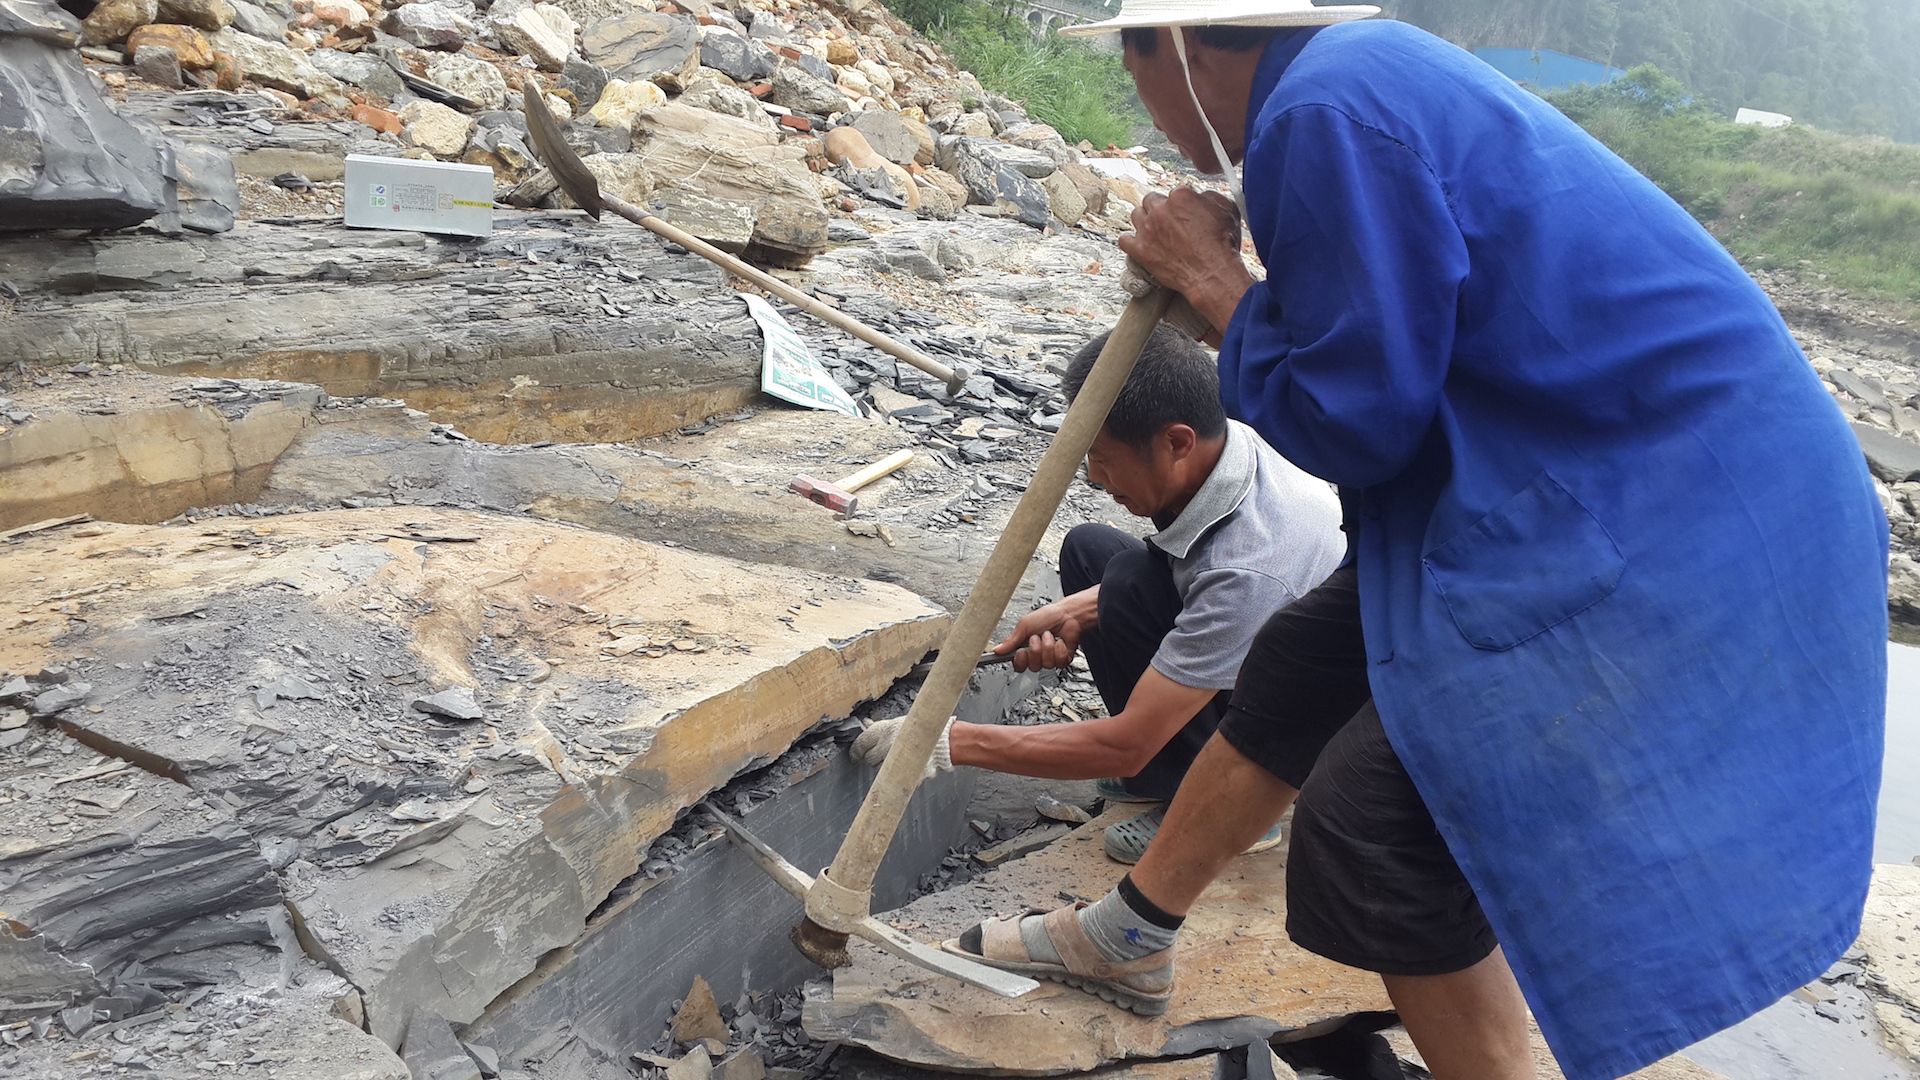 Scientists work to dig up fossils at the Qingjiang biota in China.